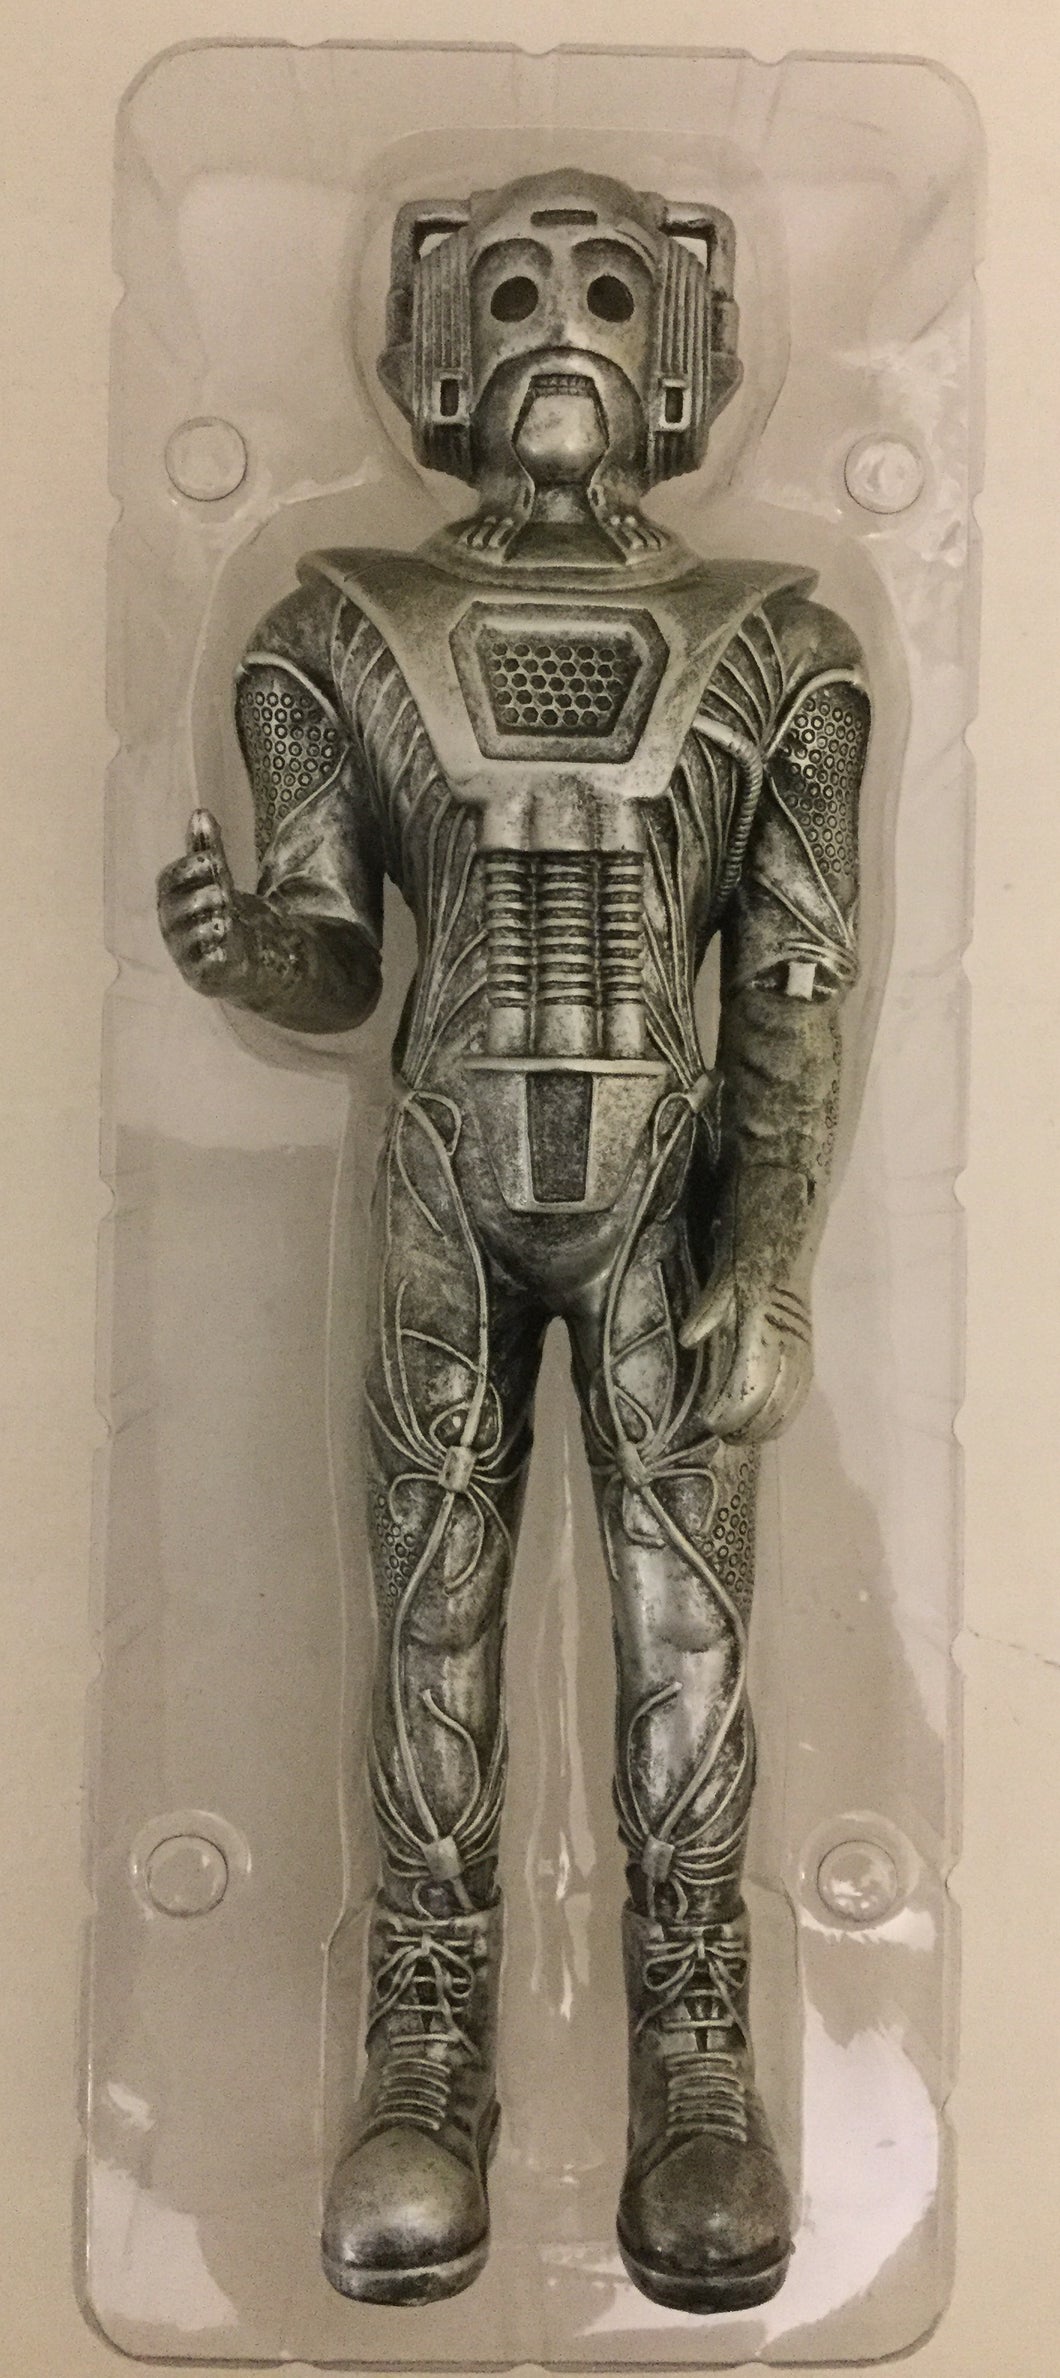 Doctor Who - CYBERMAN Limited Edition #609